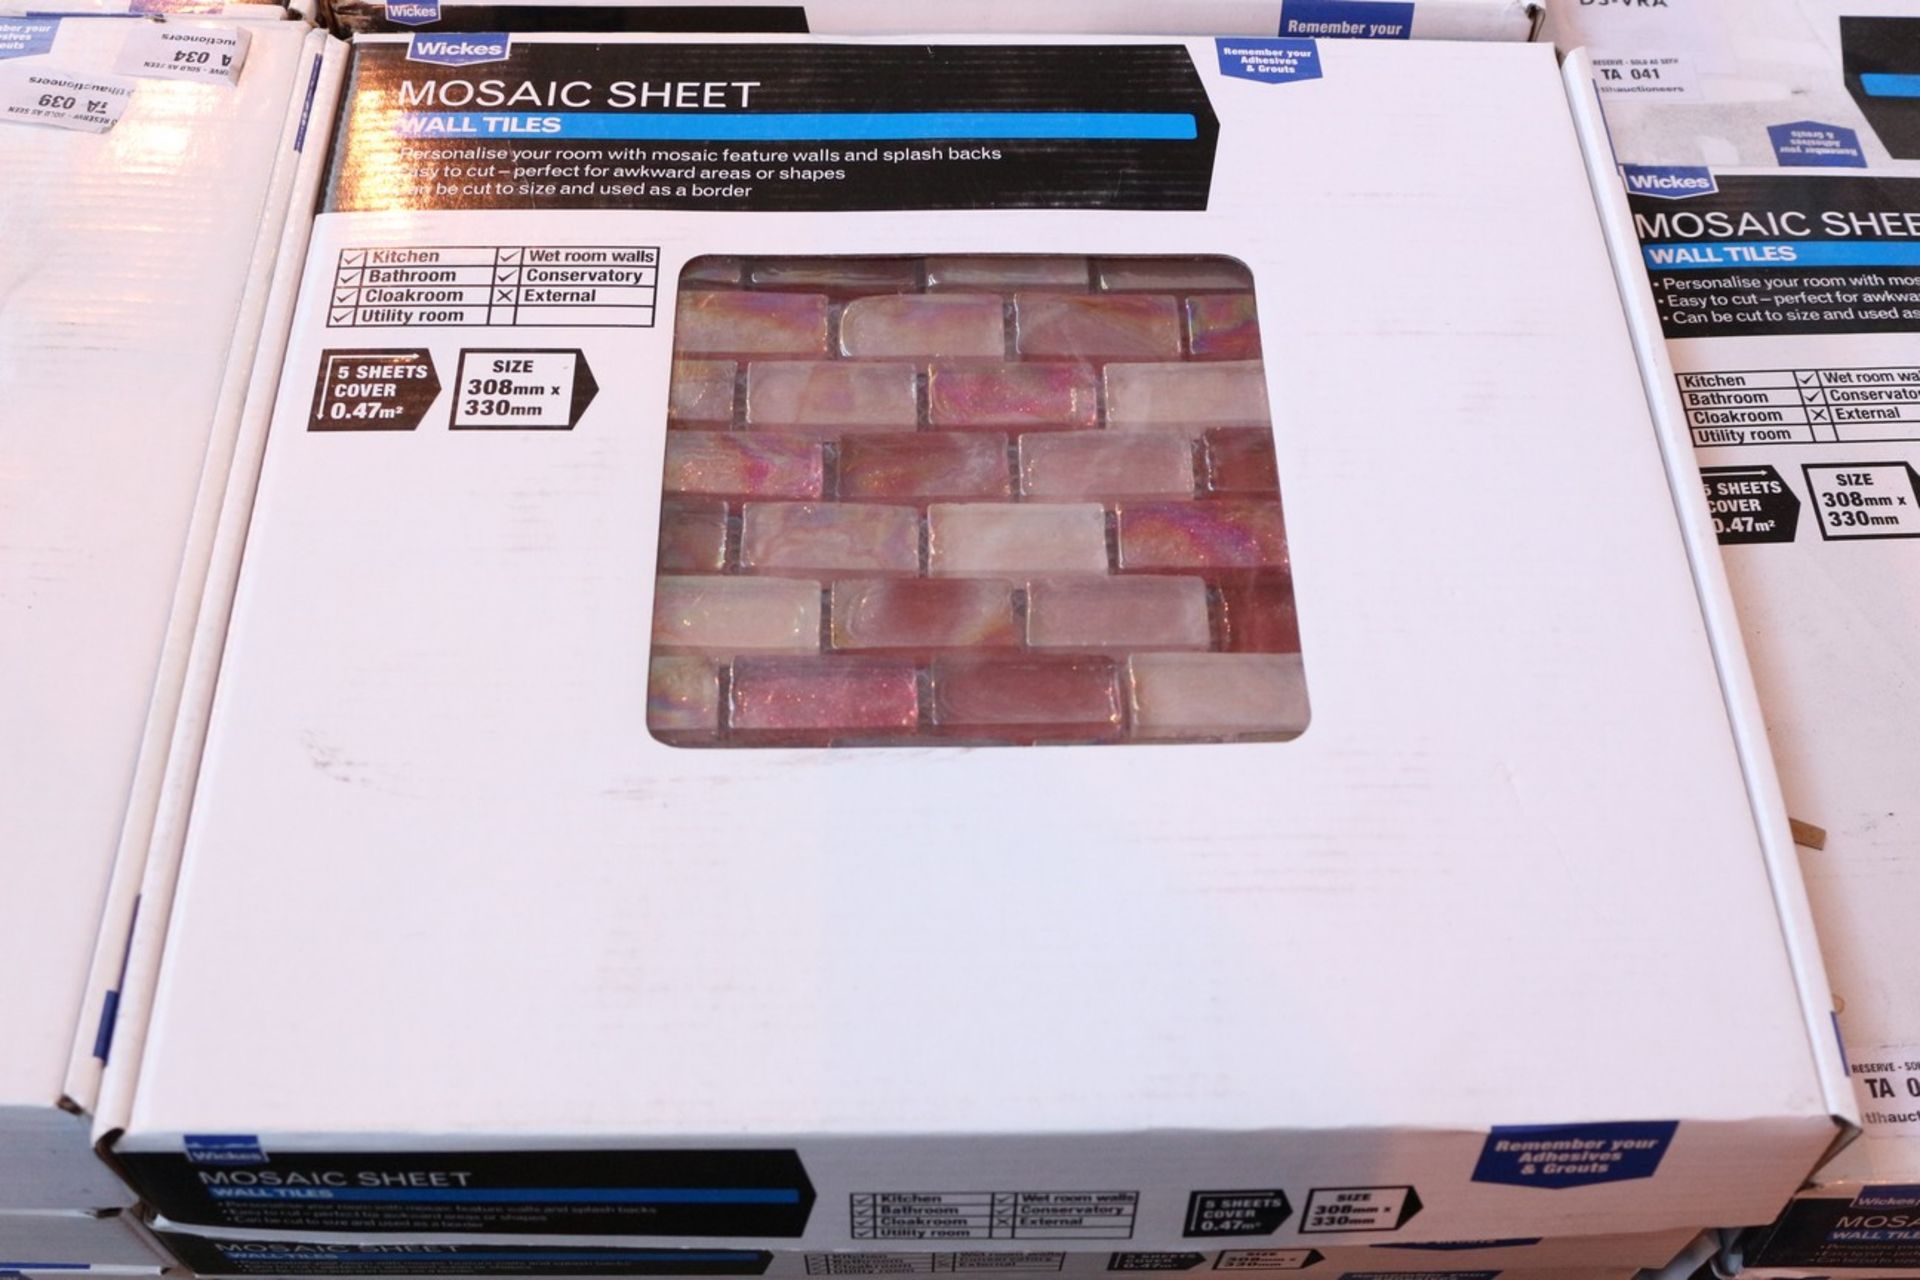 4X BY WICKES BOXED BRAND NEW MOSAIC SHEET WALL TILES IN PINK 308MMX330MM COMBINED RRP £199 (DS-VRA)